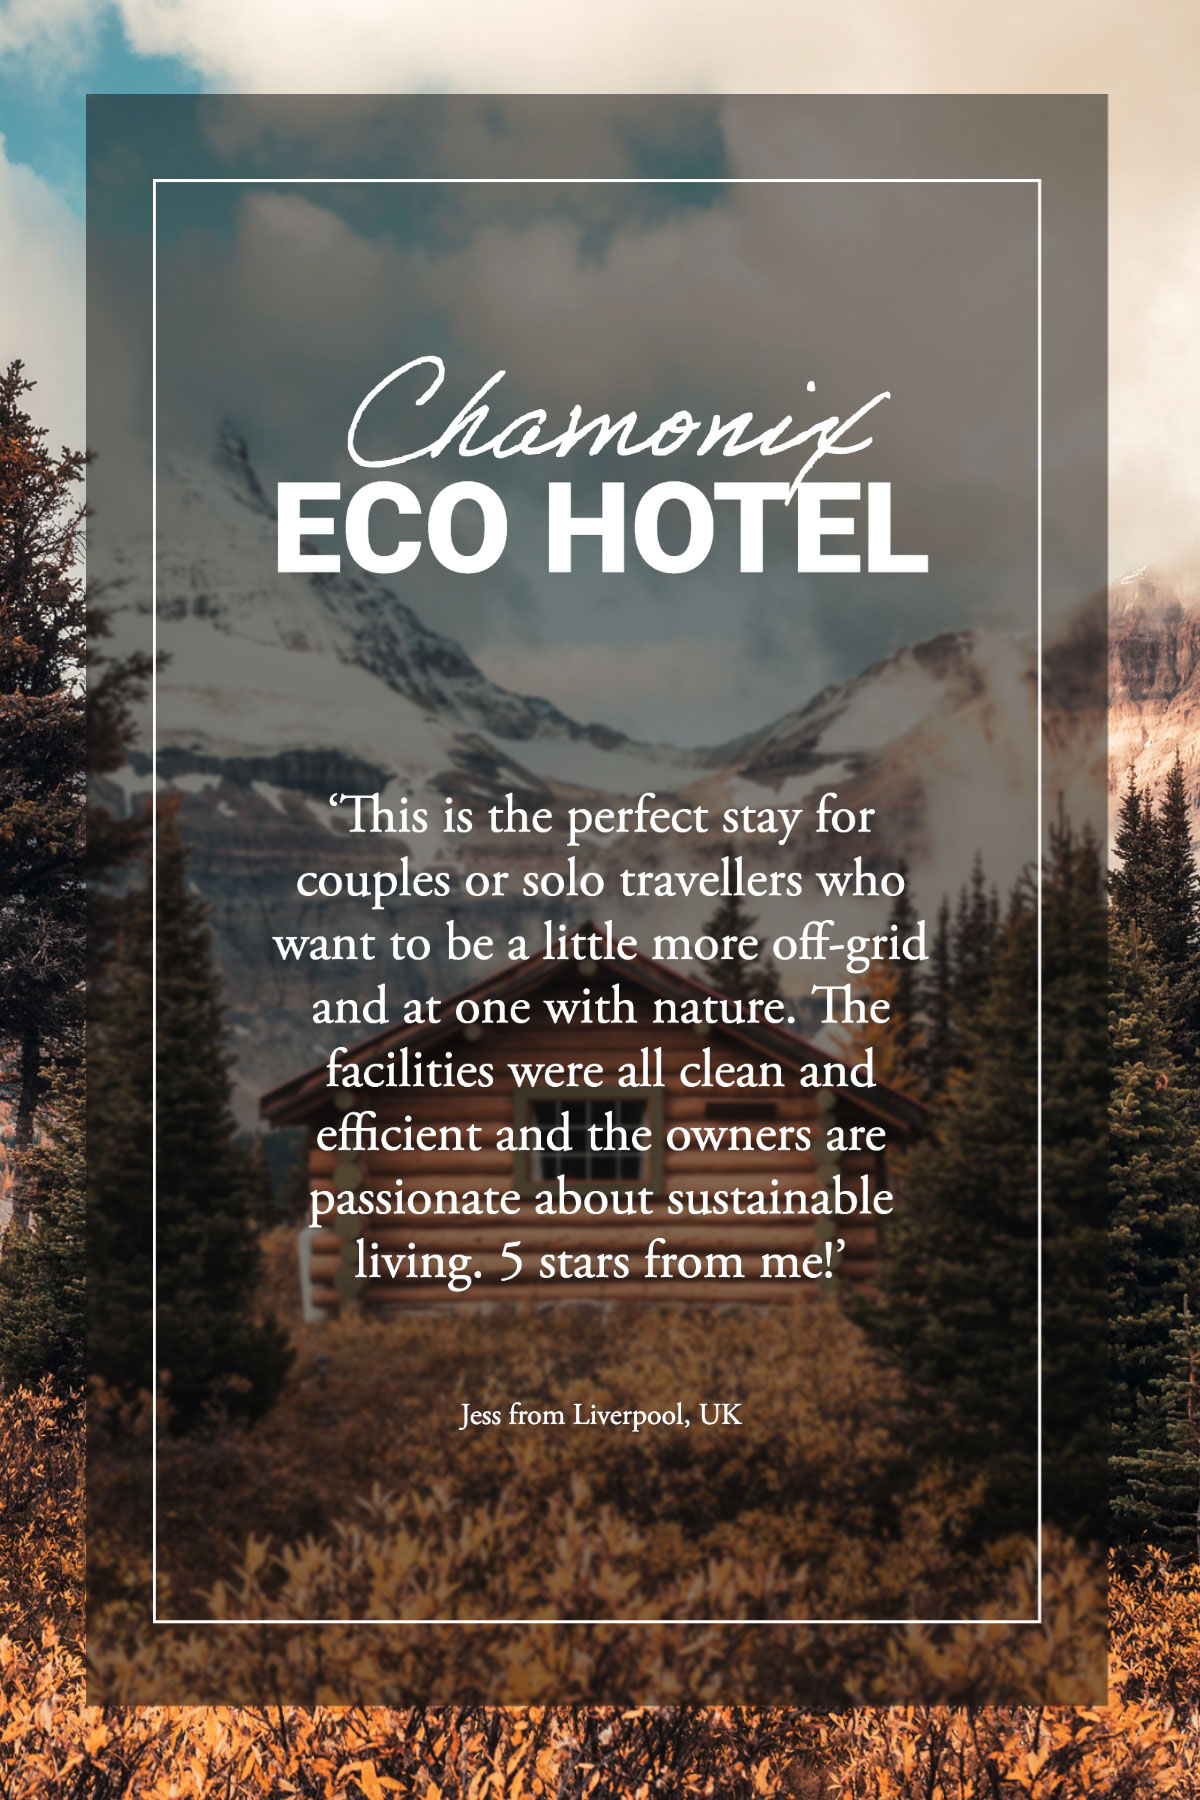 Grey Eco Hotel Recommendation Pinterest Post Chamonix Eco Hotel ‘This is the perfect stay for couples or solo travellers who want to be a little more off-grid and at one with nature. The facilities were all clean and efficient and the owners are passionate about sustainable living. 5 stars from me!’ Jess from Liverpool, UK